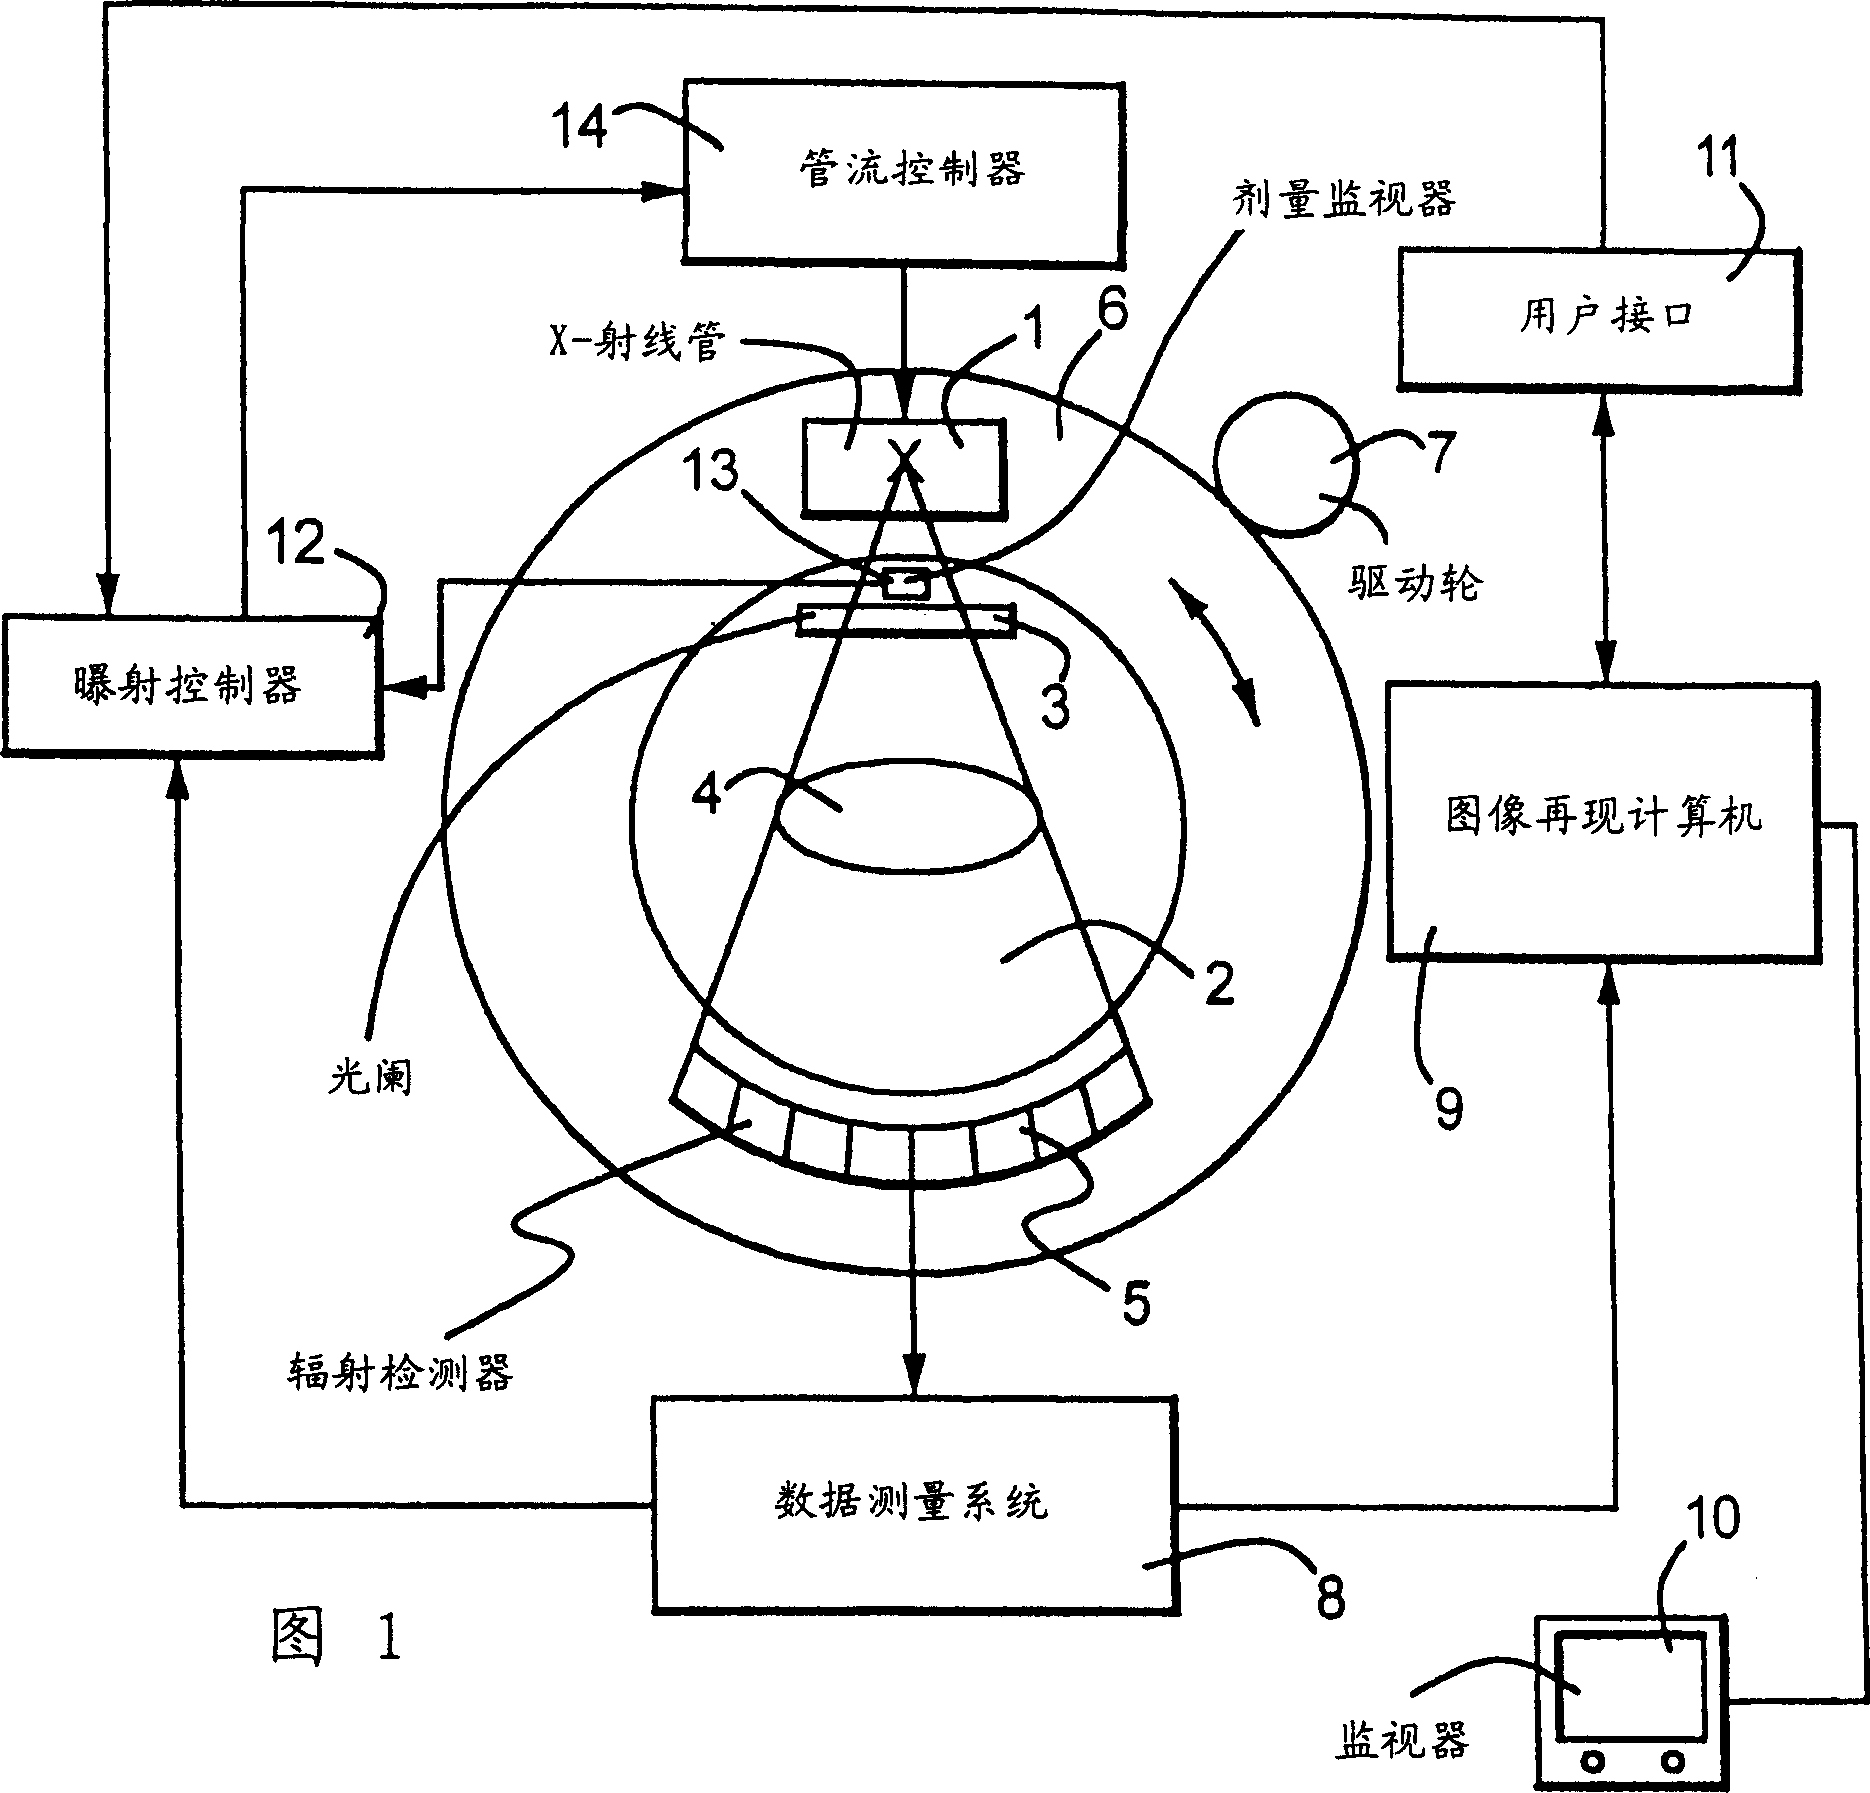 Method and equipment of automatic exposure control in computer tomoscan